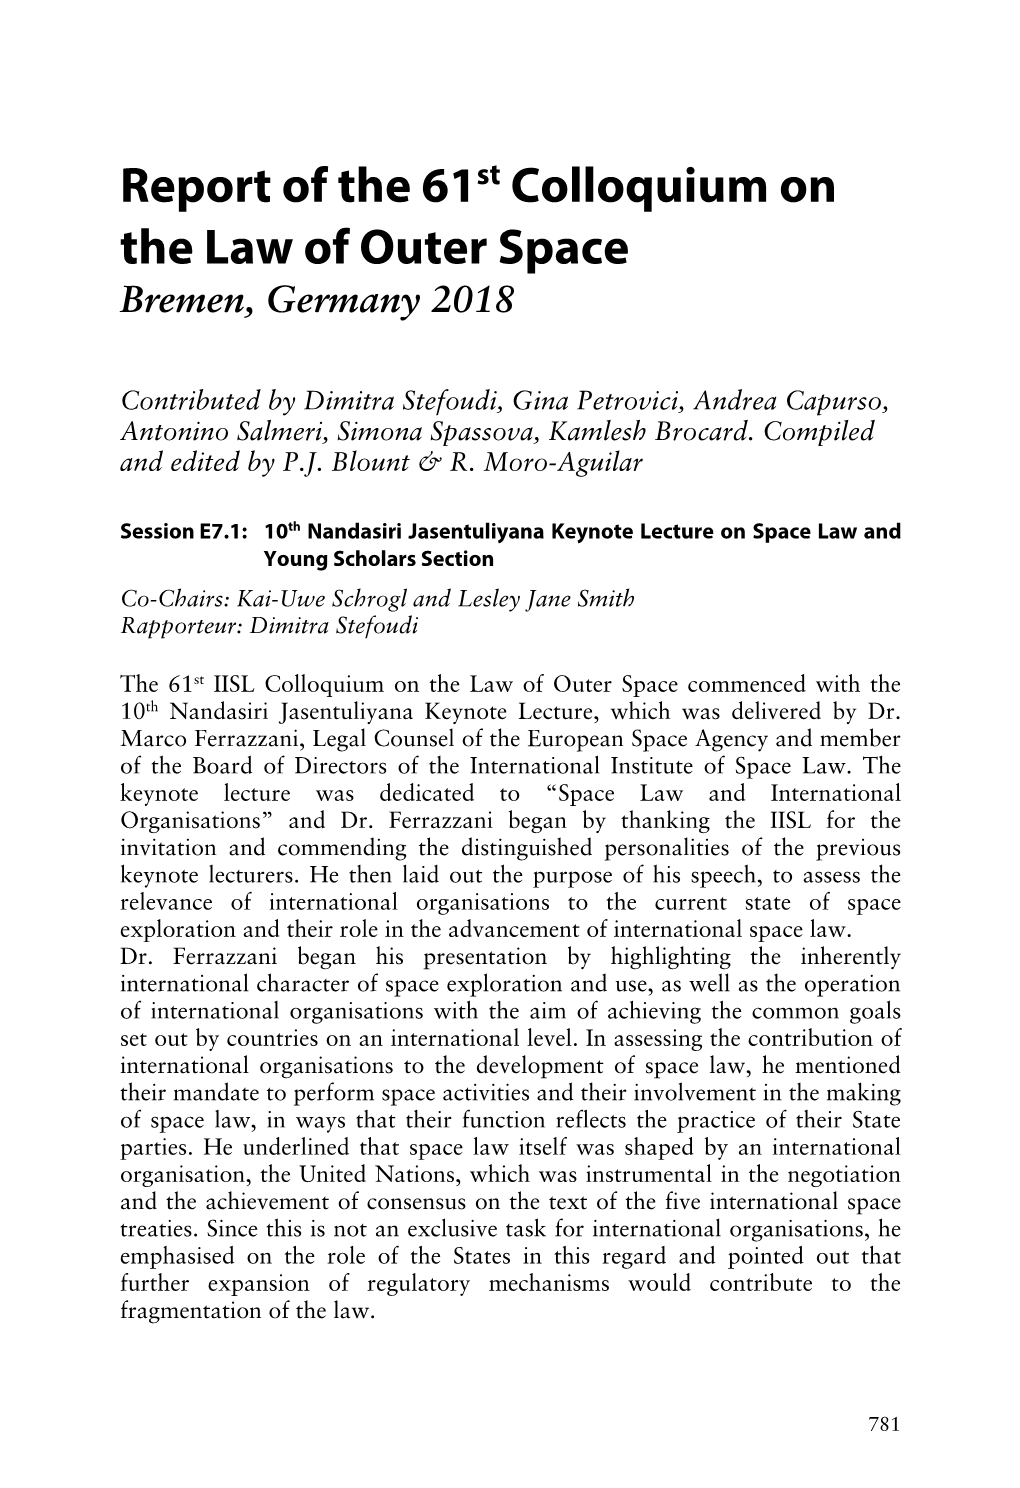 Report of the 61St Colloquium on the Law of Outer Space Bremen, Germany 2018